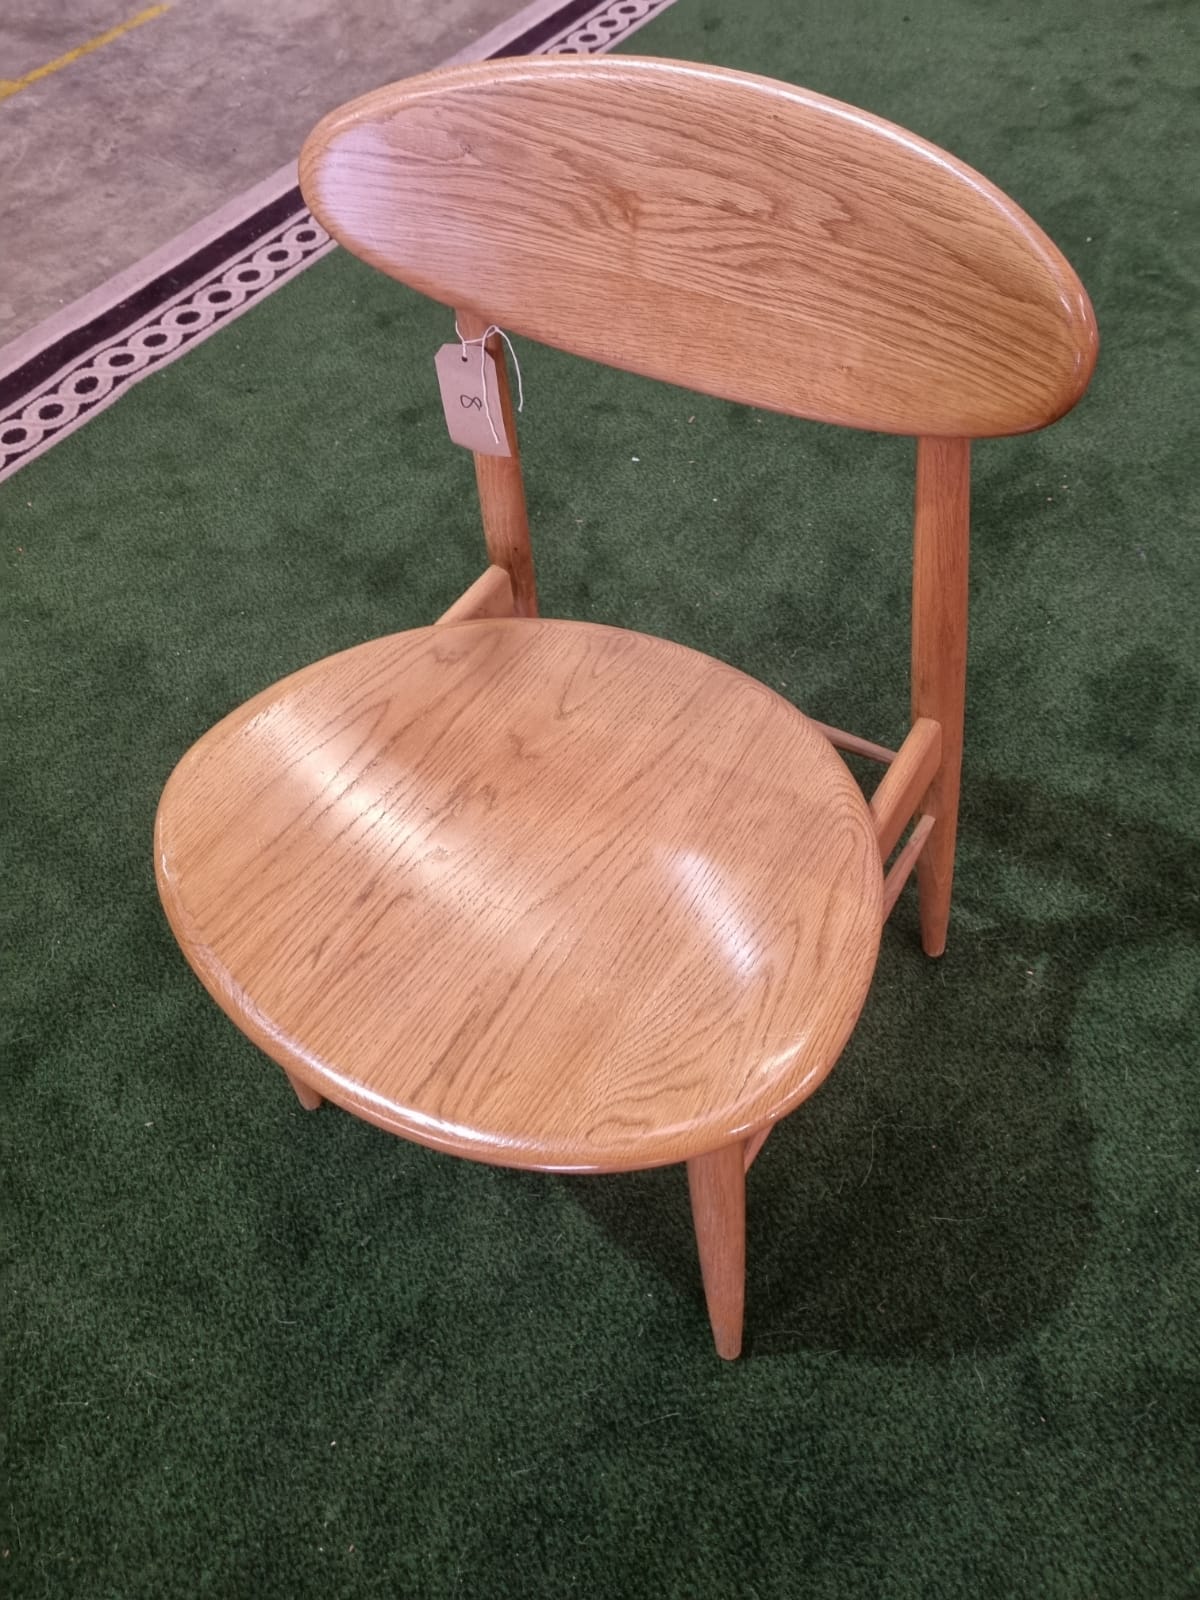 Broseley Classic Furniture Dining Side Chair Finest Solid Oak W530 X Pitch 470mm X H850mm SR8 Ex - Image 3 of 3